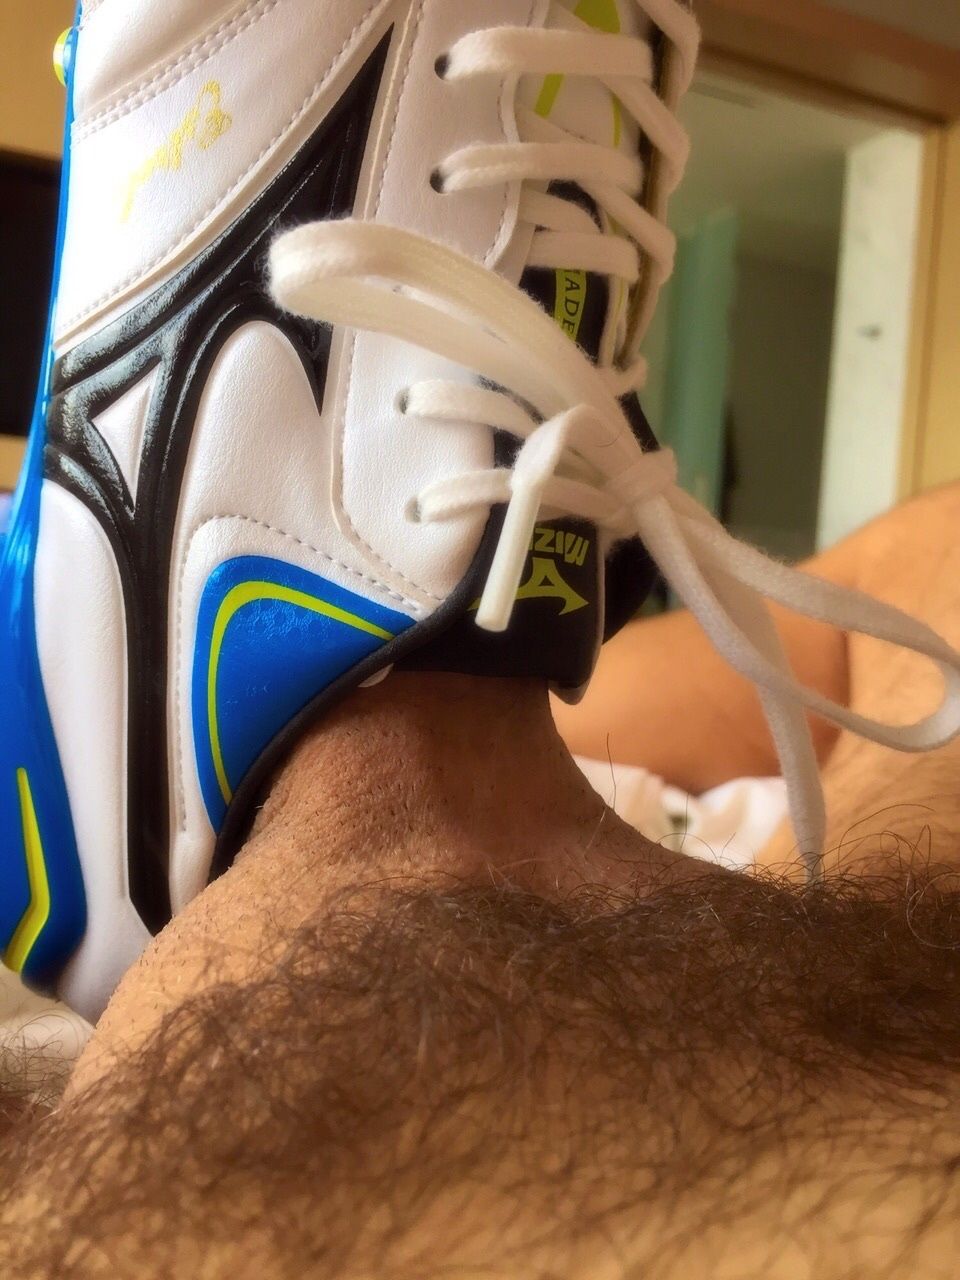 Some Hot Sneakers From my Past #16